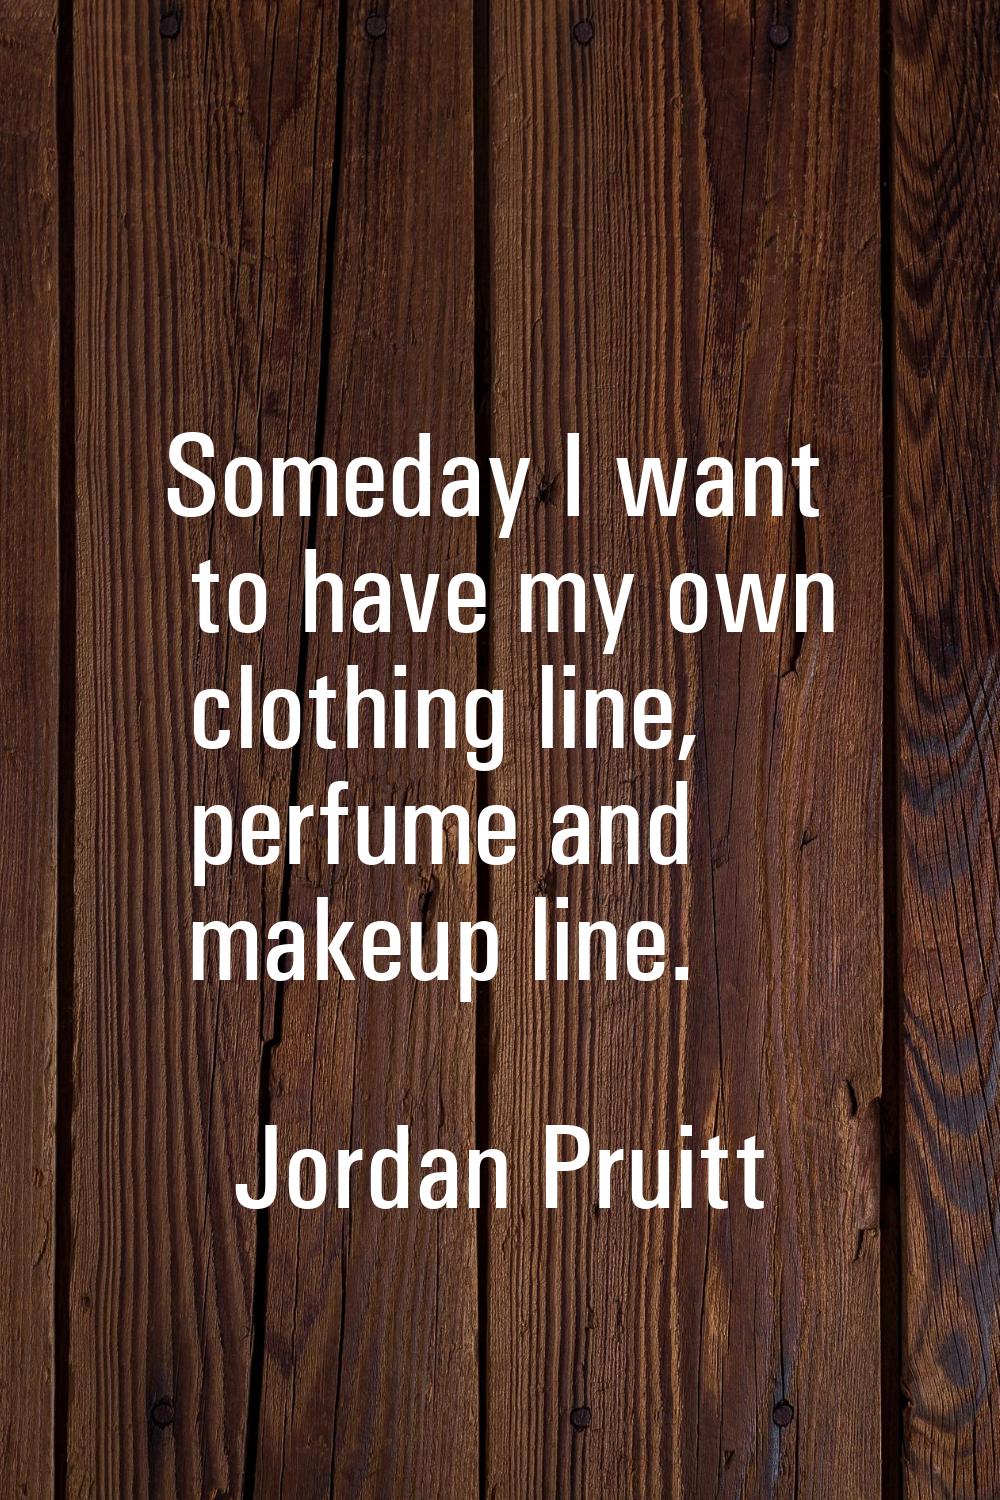 Someday I want to have my own clothing line, perfume and makeup line.